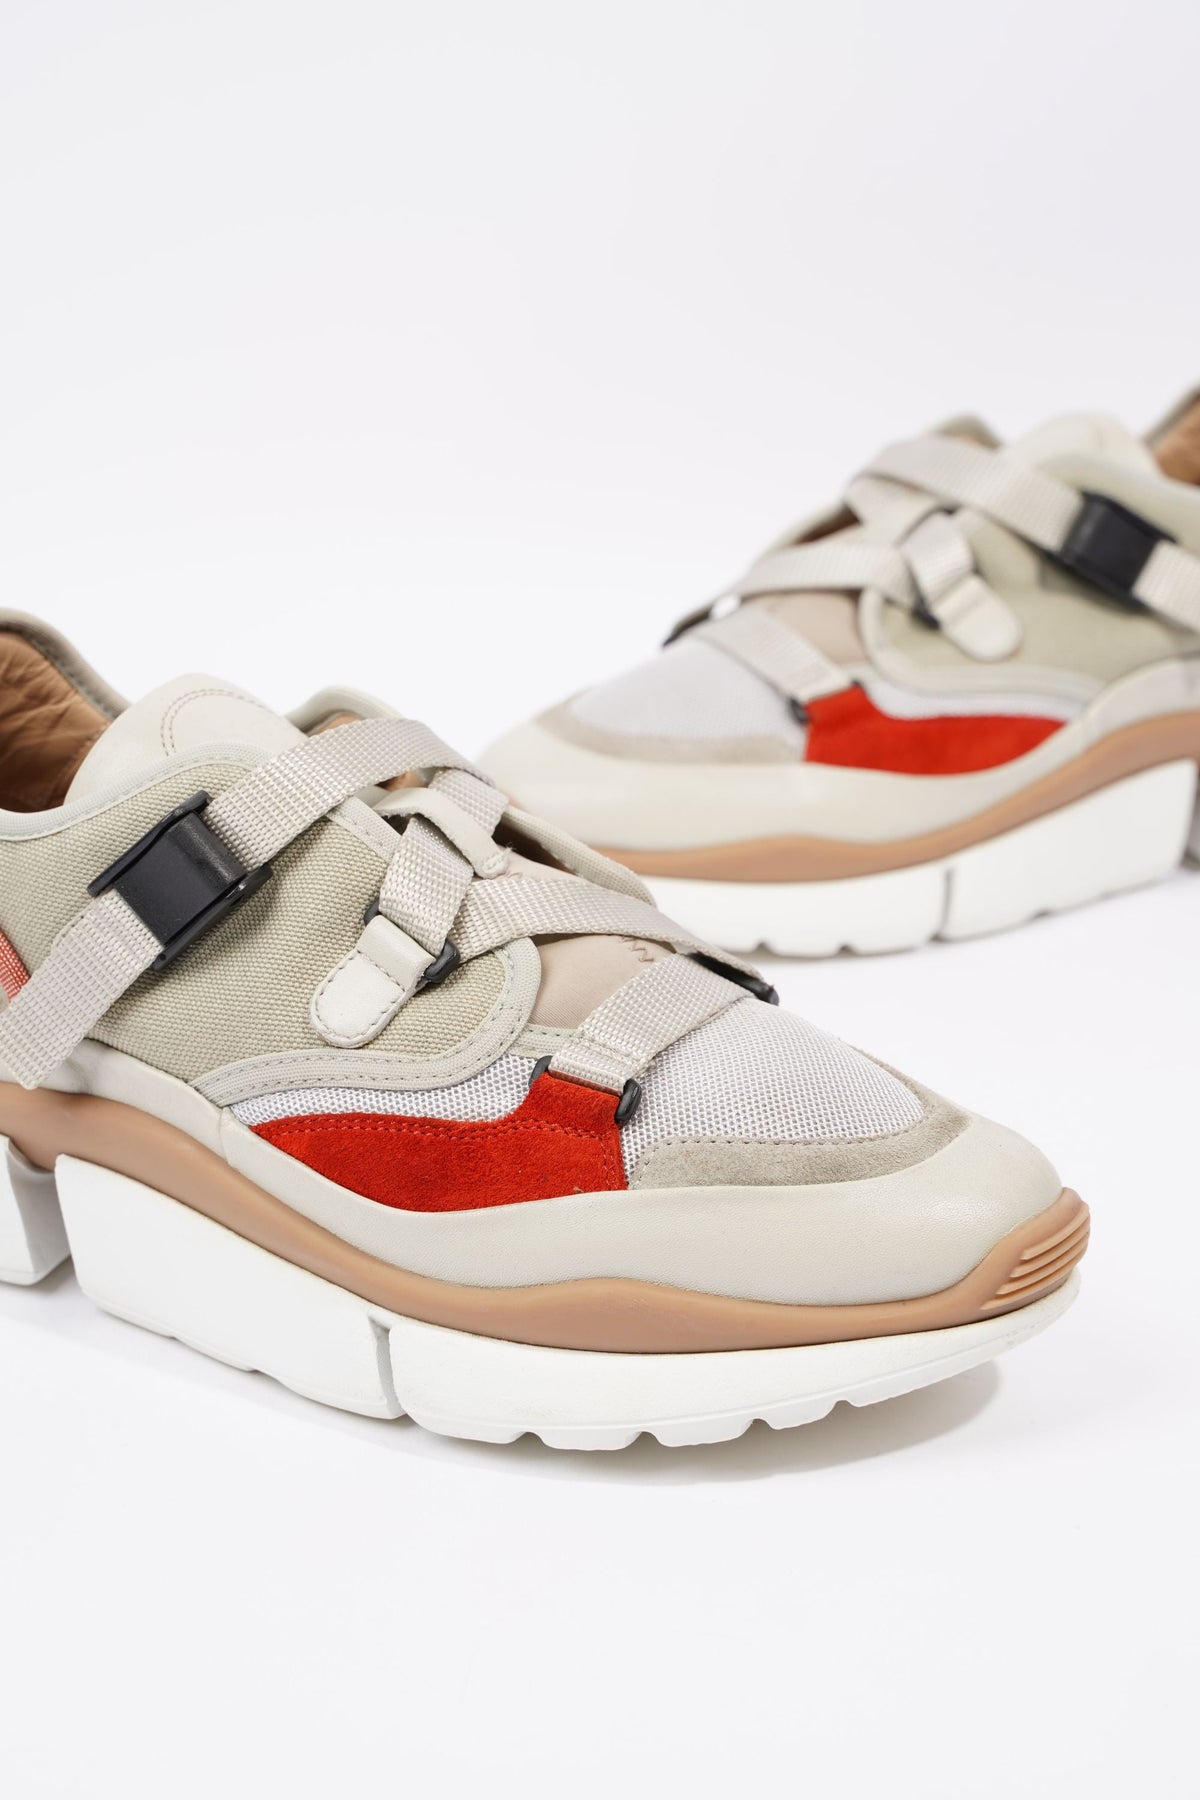 See by Chloé Sneakers for Women - Shop on FARFETCH